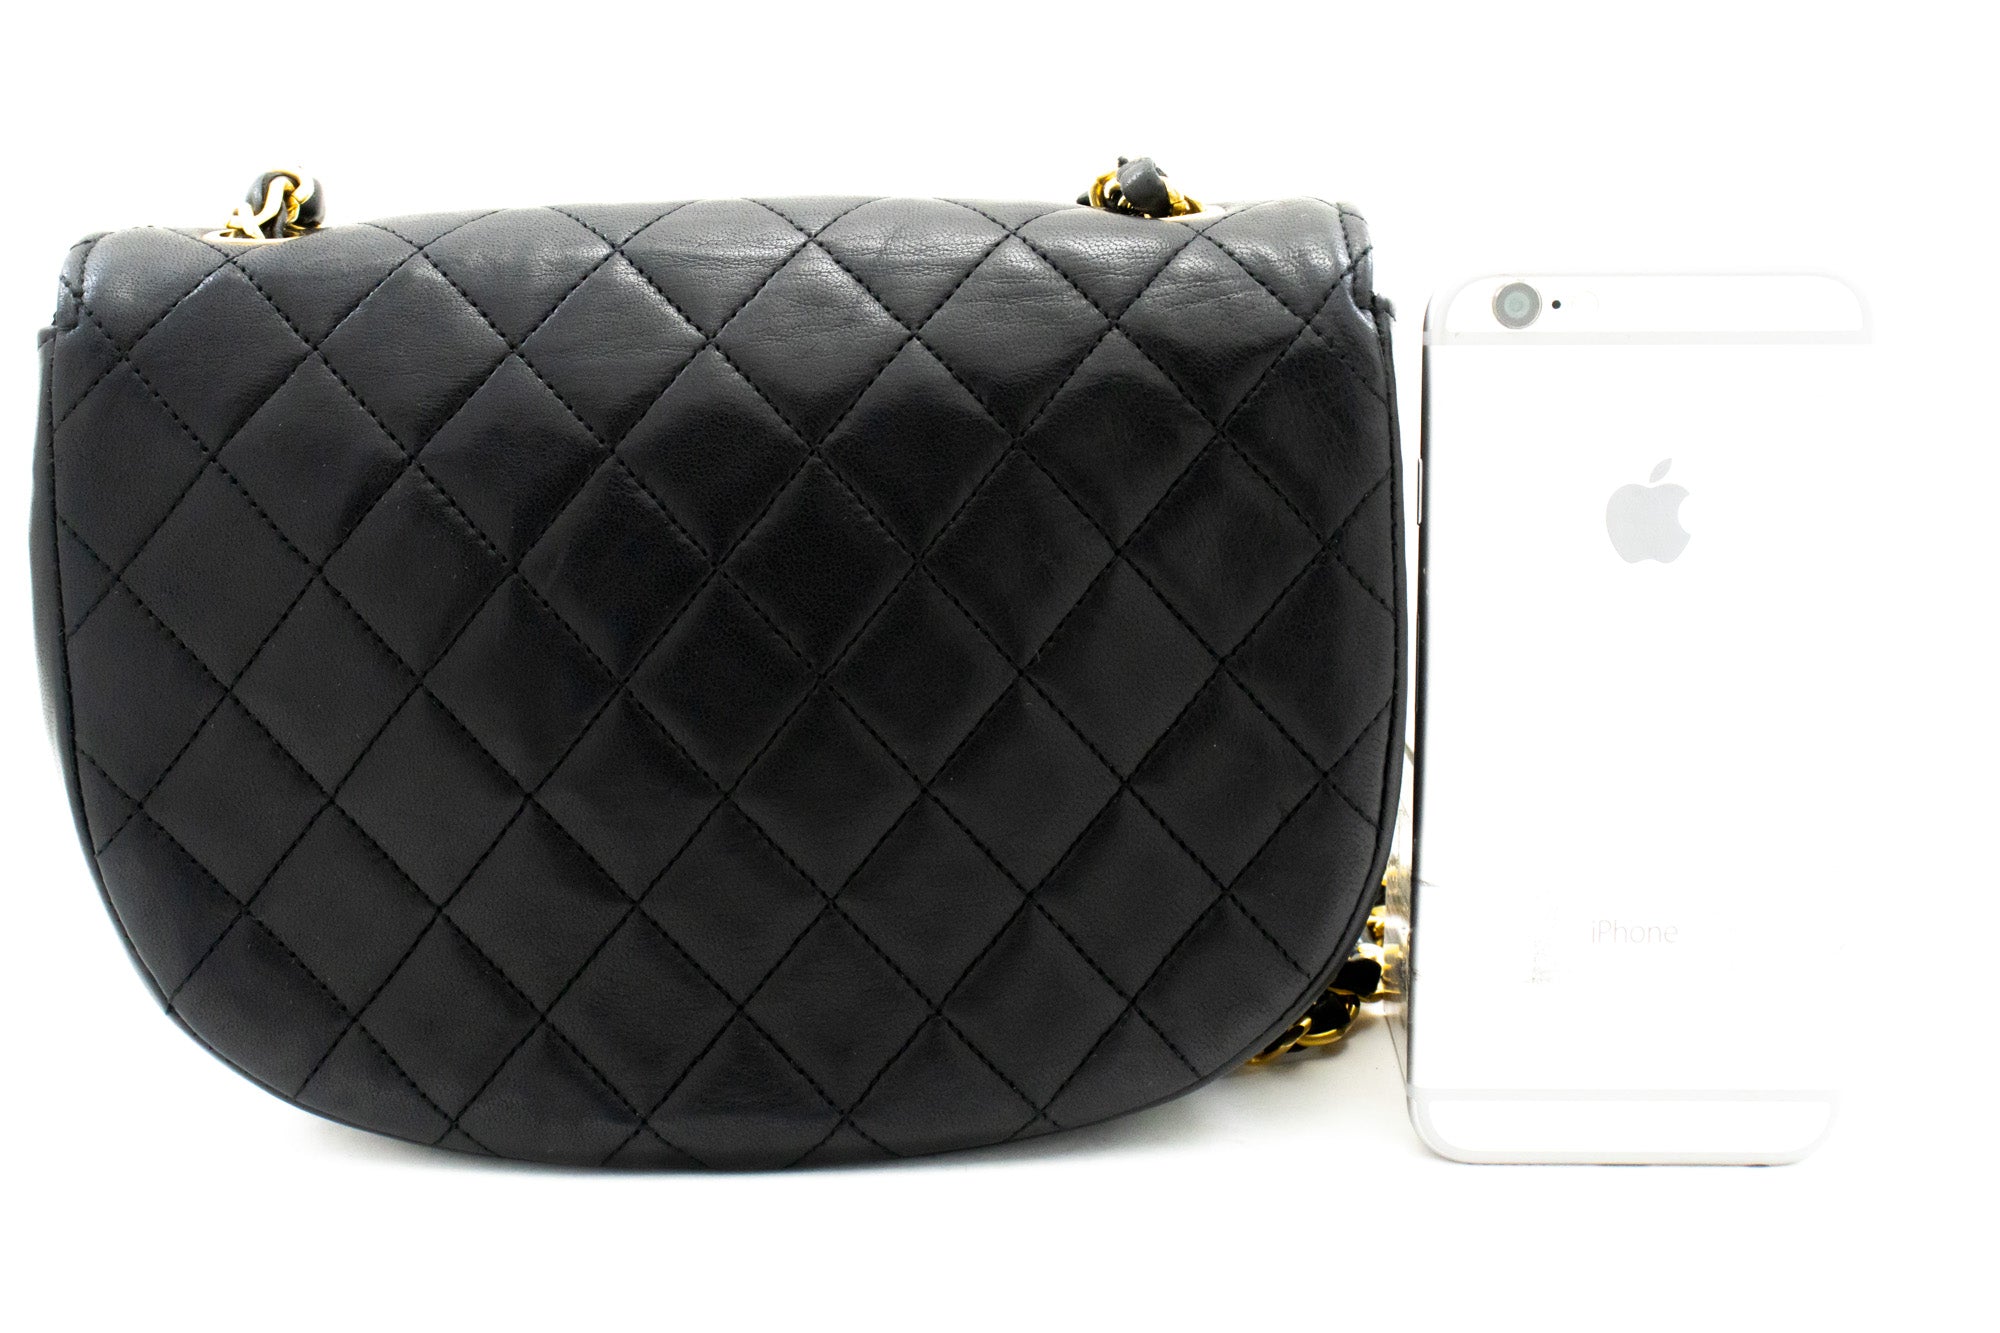 Chanel Vintage Classic Quilted Caviar Single White Jumbo Flap